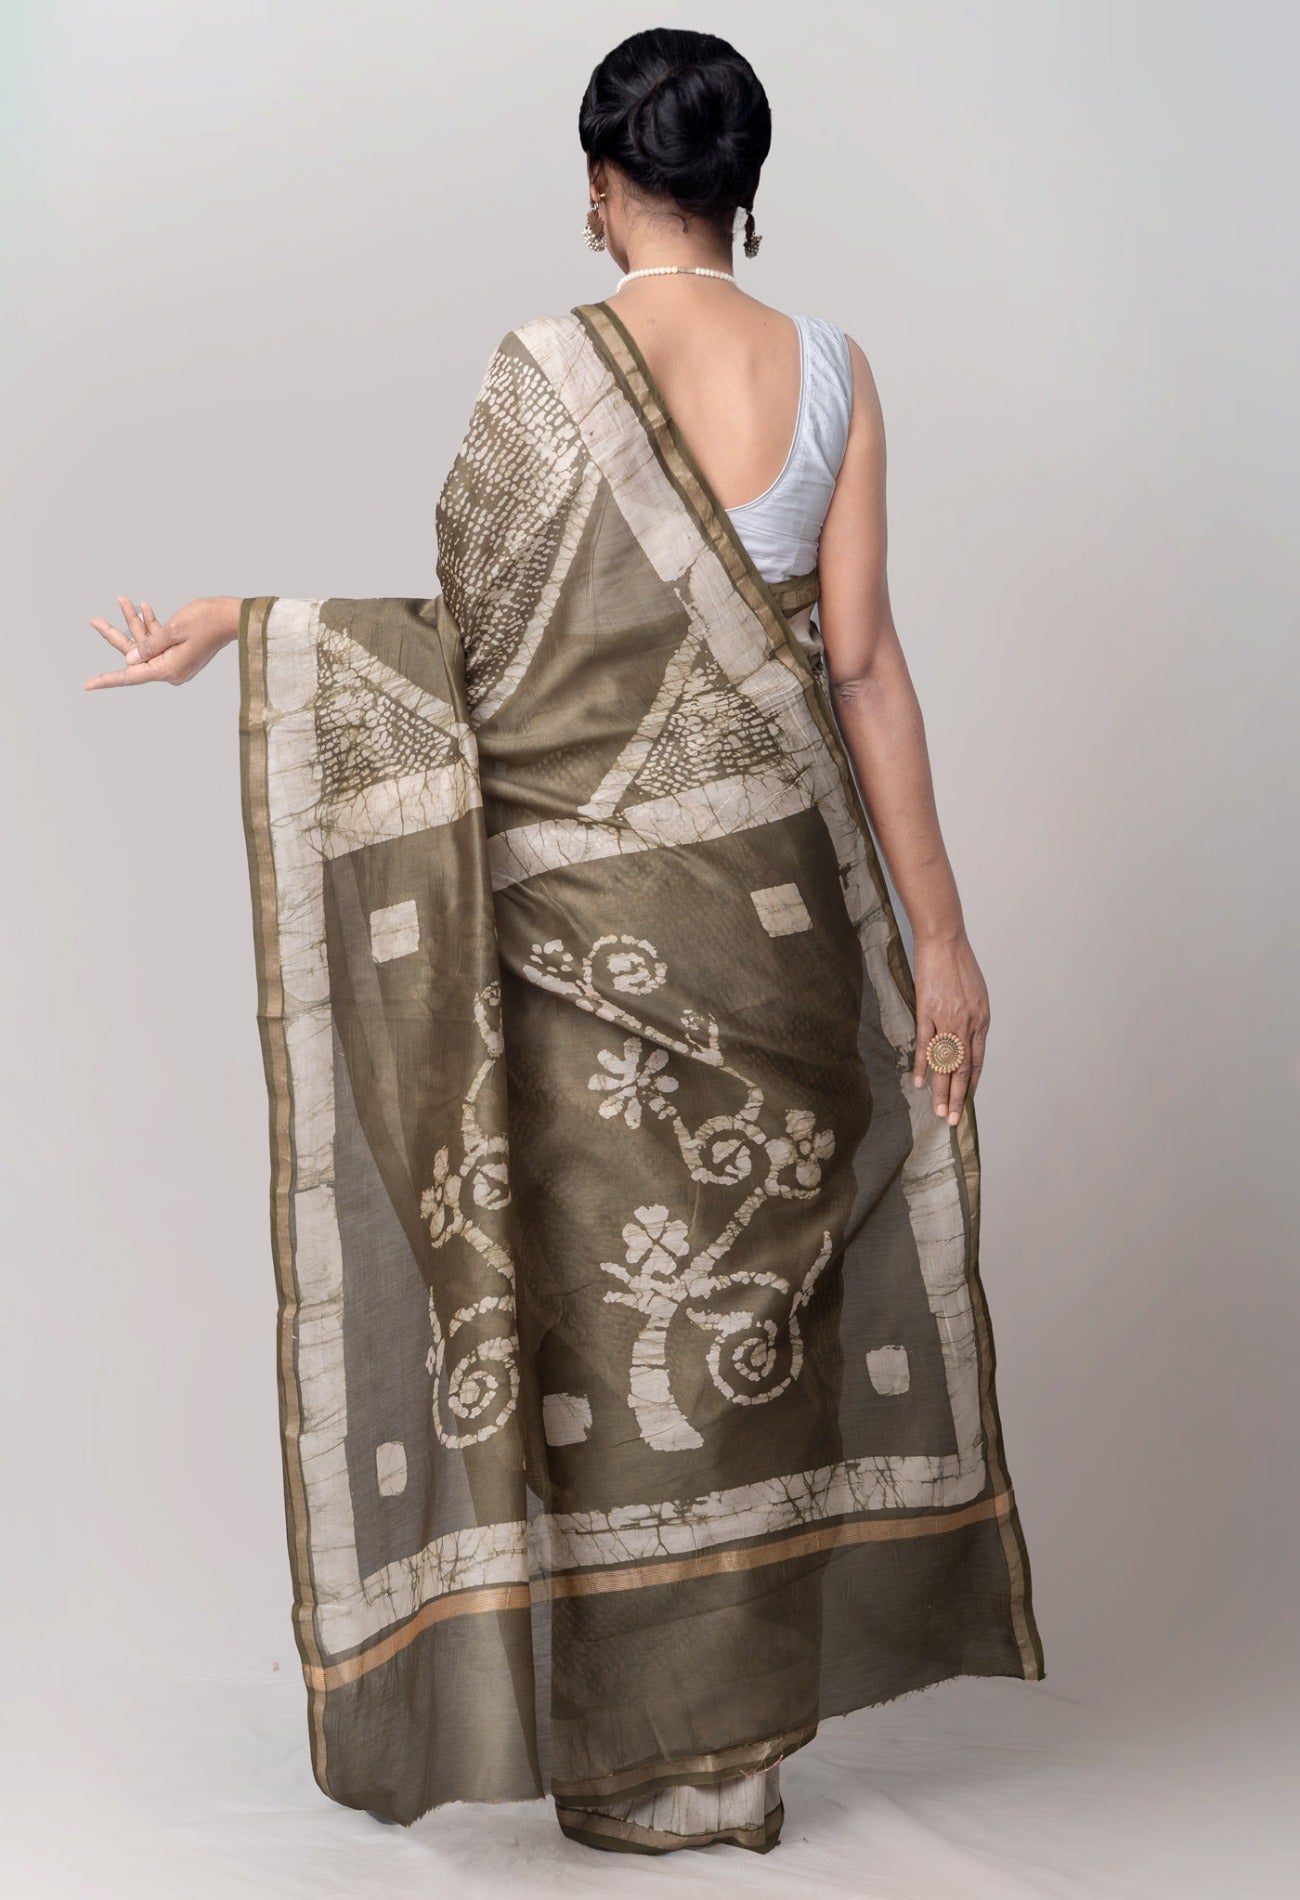 Online Shopping for Green Pure Fusion Batik Chanderi Sico Saree with Fancy/Ethnic Prints from Rajasthan at Unnatisilks.com India
